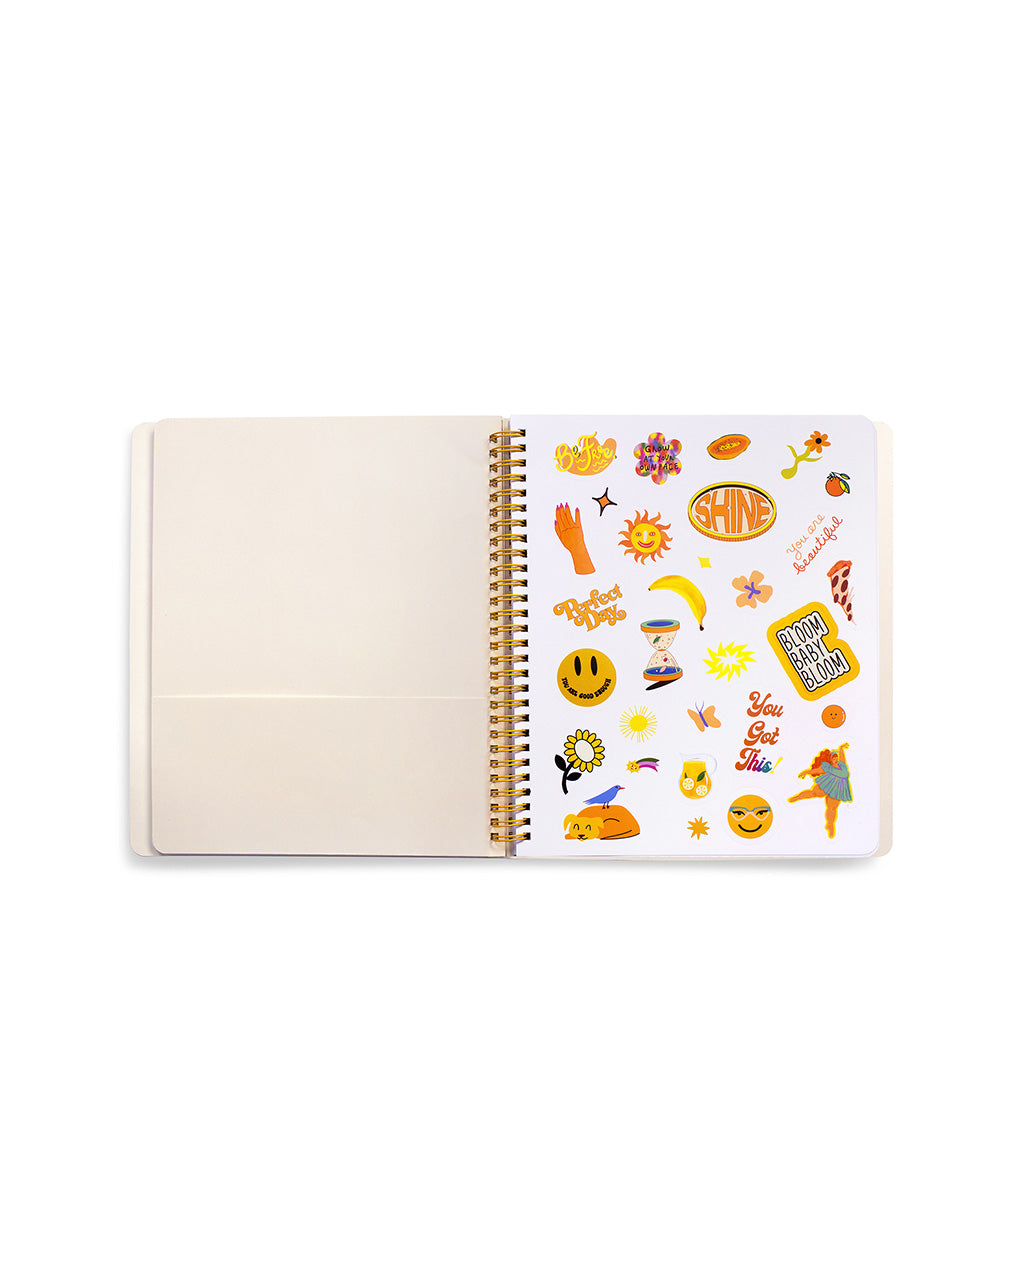 ZAMSI 1800+ Stickers for Planner 32 Sheets To Improve Your Planner